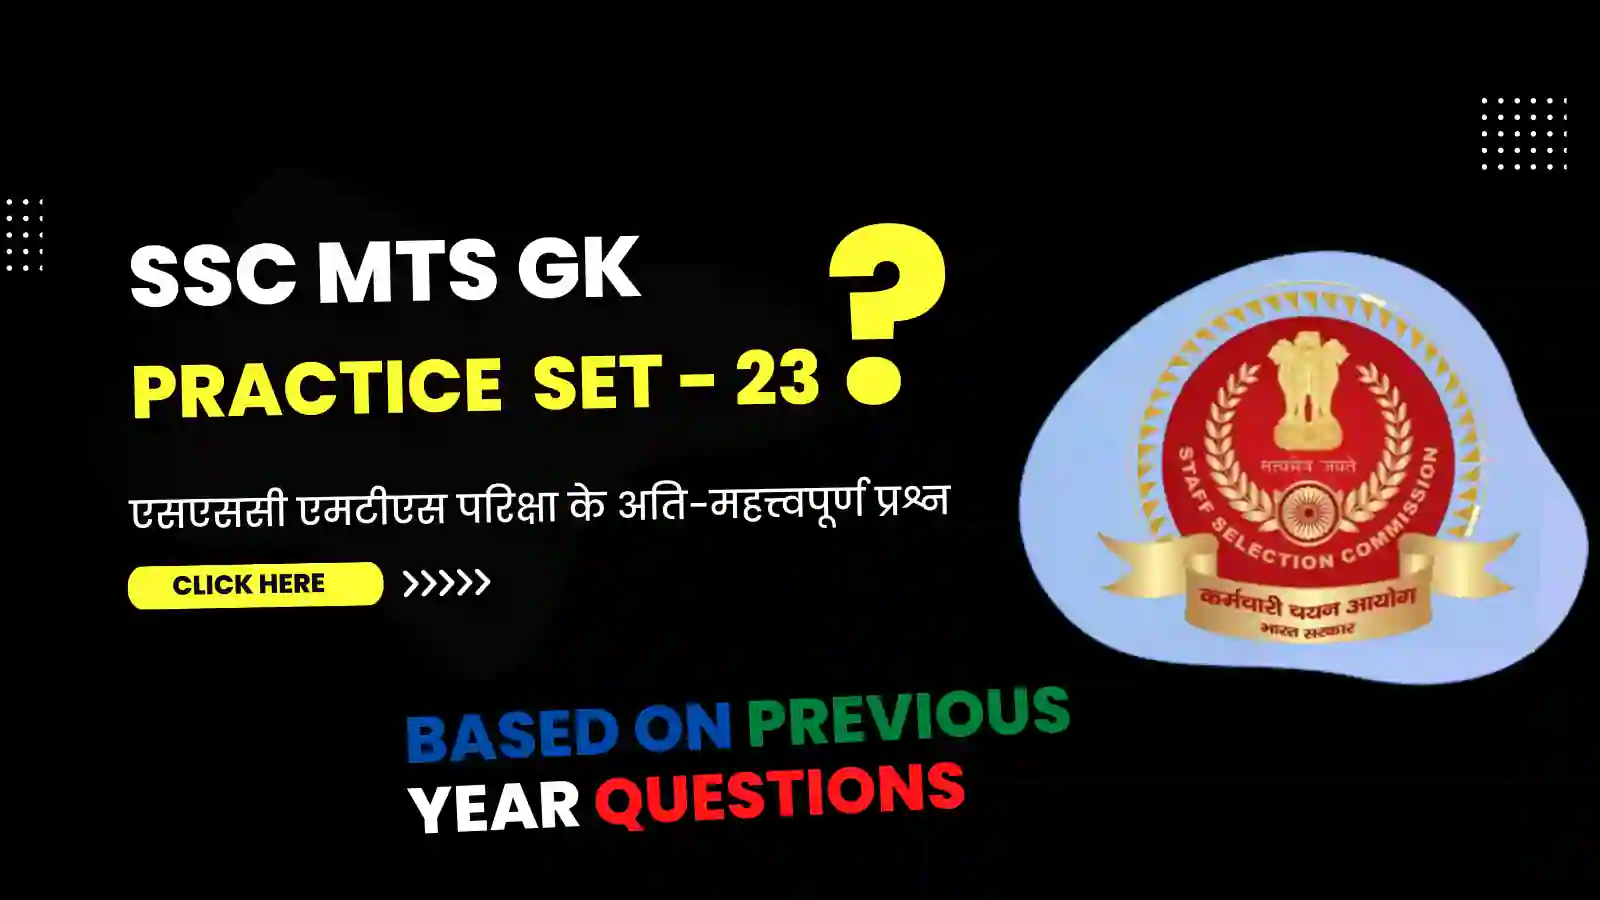 SSC MTS GK Question Practice Set in Hindi - 23